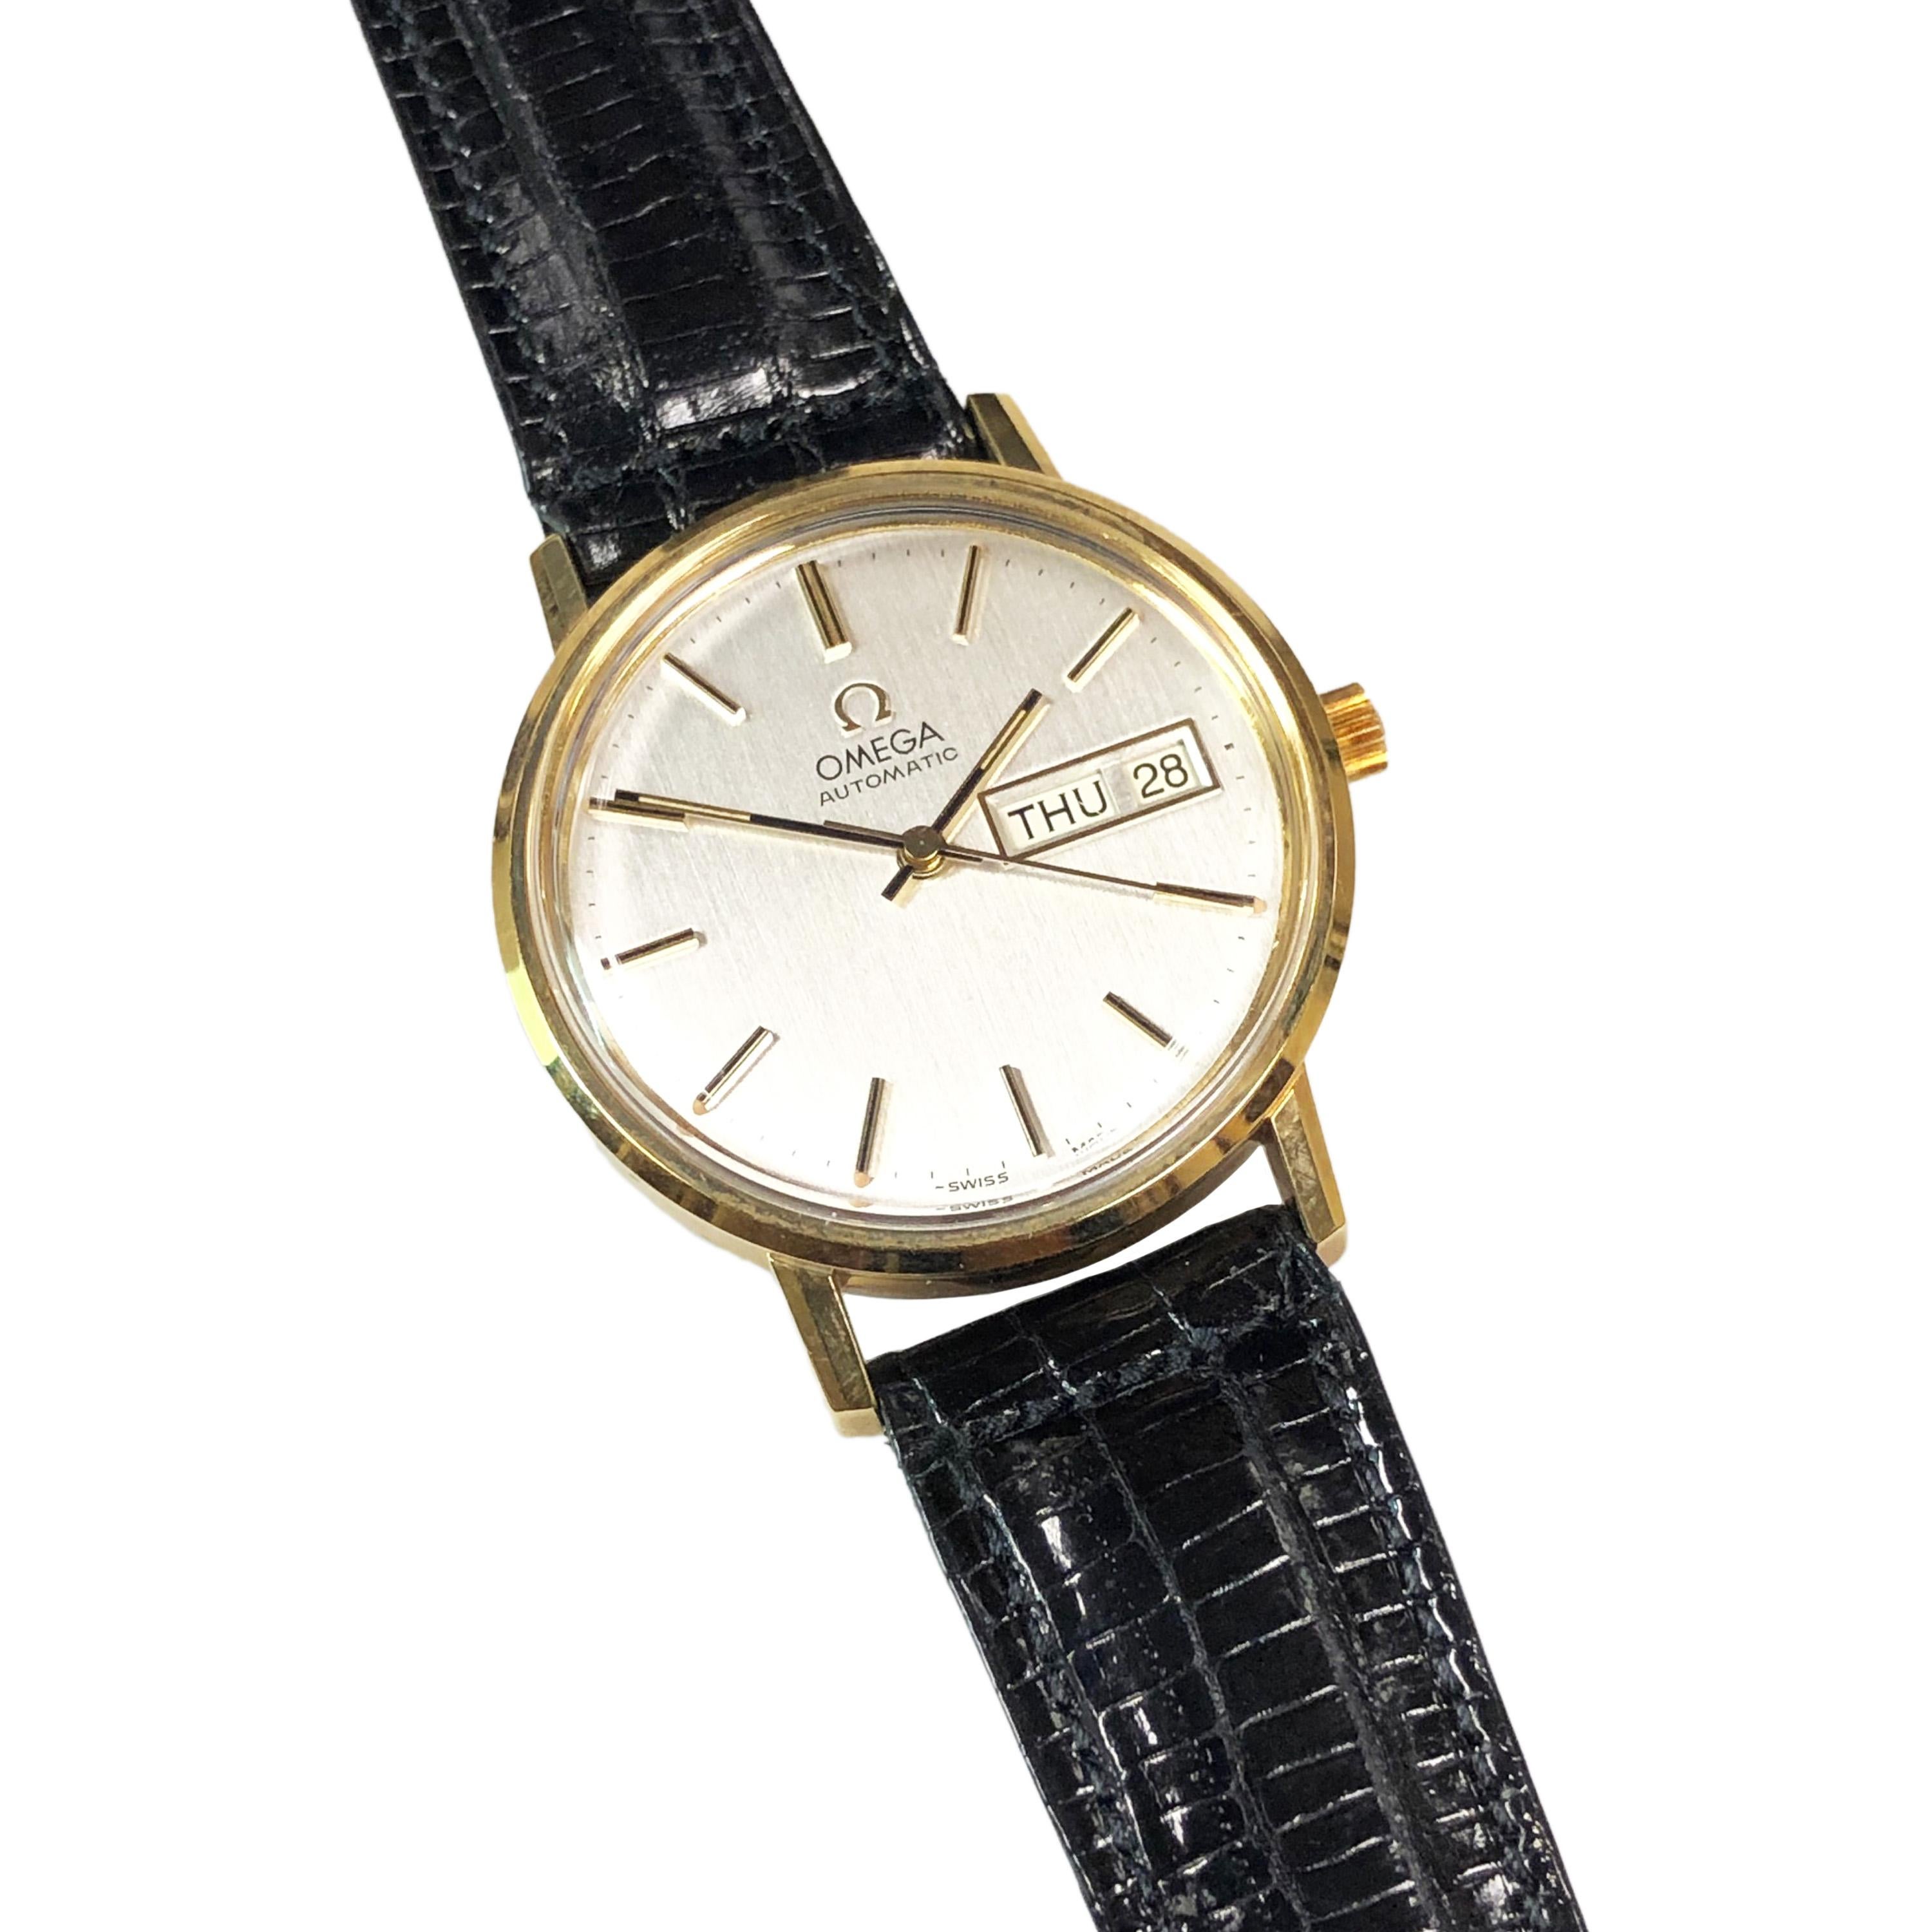 Circa 1960s Omega Gents Wrist Watch, from a recent discovery in a Jewelry store safe, never worn, new old stock, 35 MM Gold  Shell top with Stainless Steel Back 2 Piece case.  Caliber 1020 Automatic, Self Winding movement. Silver Dial with raised